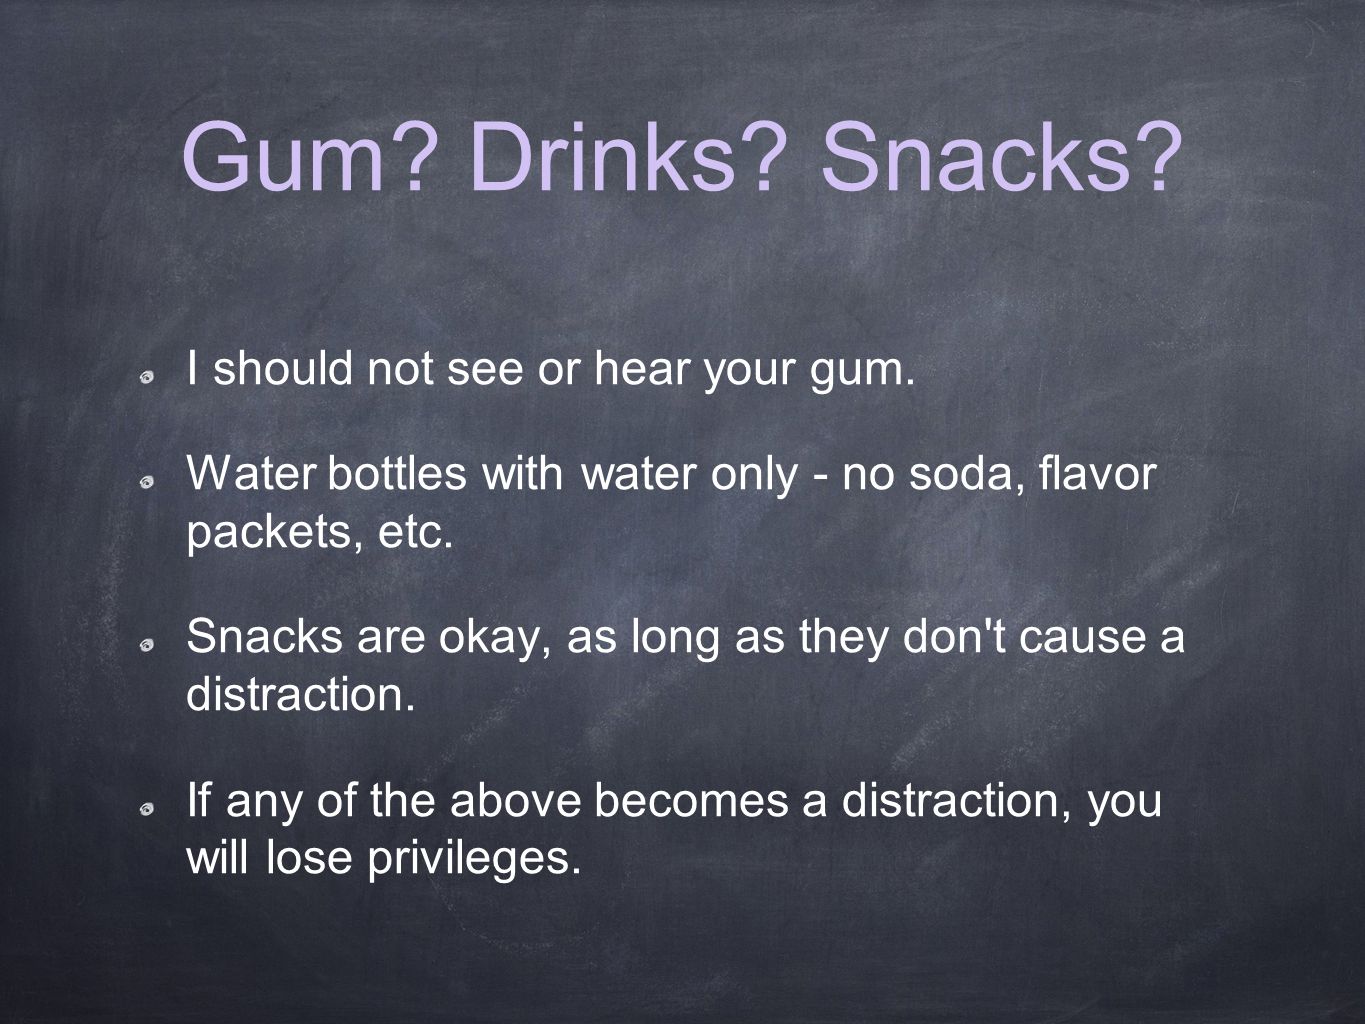 Gum. Drinks. Snacks. I should not see or hear your gum.